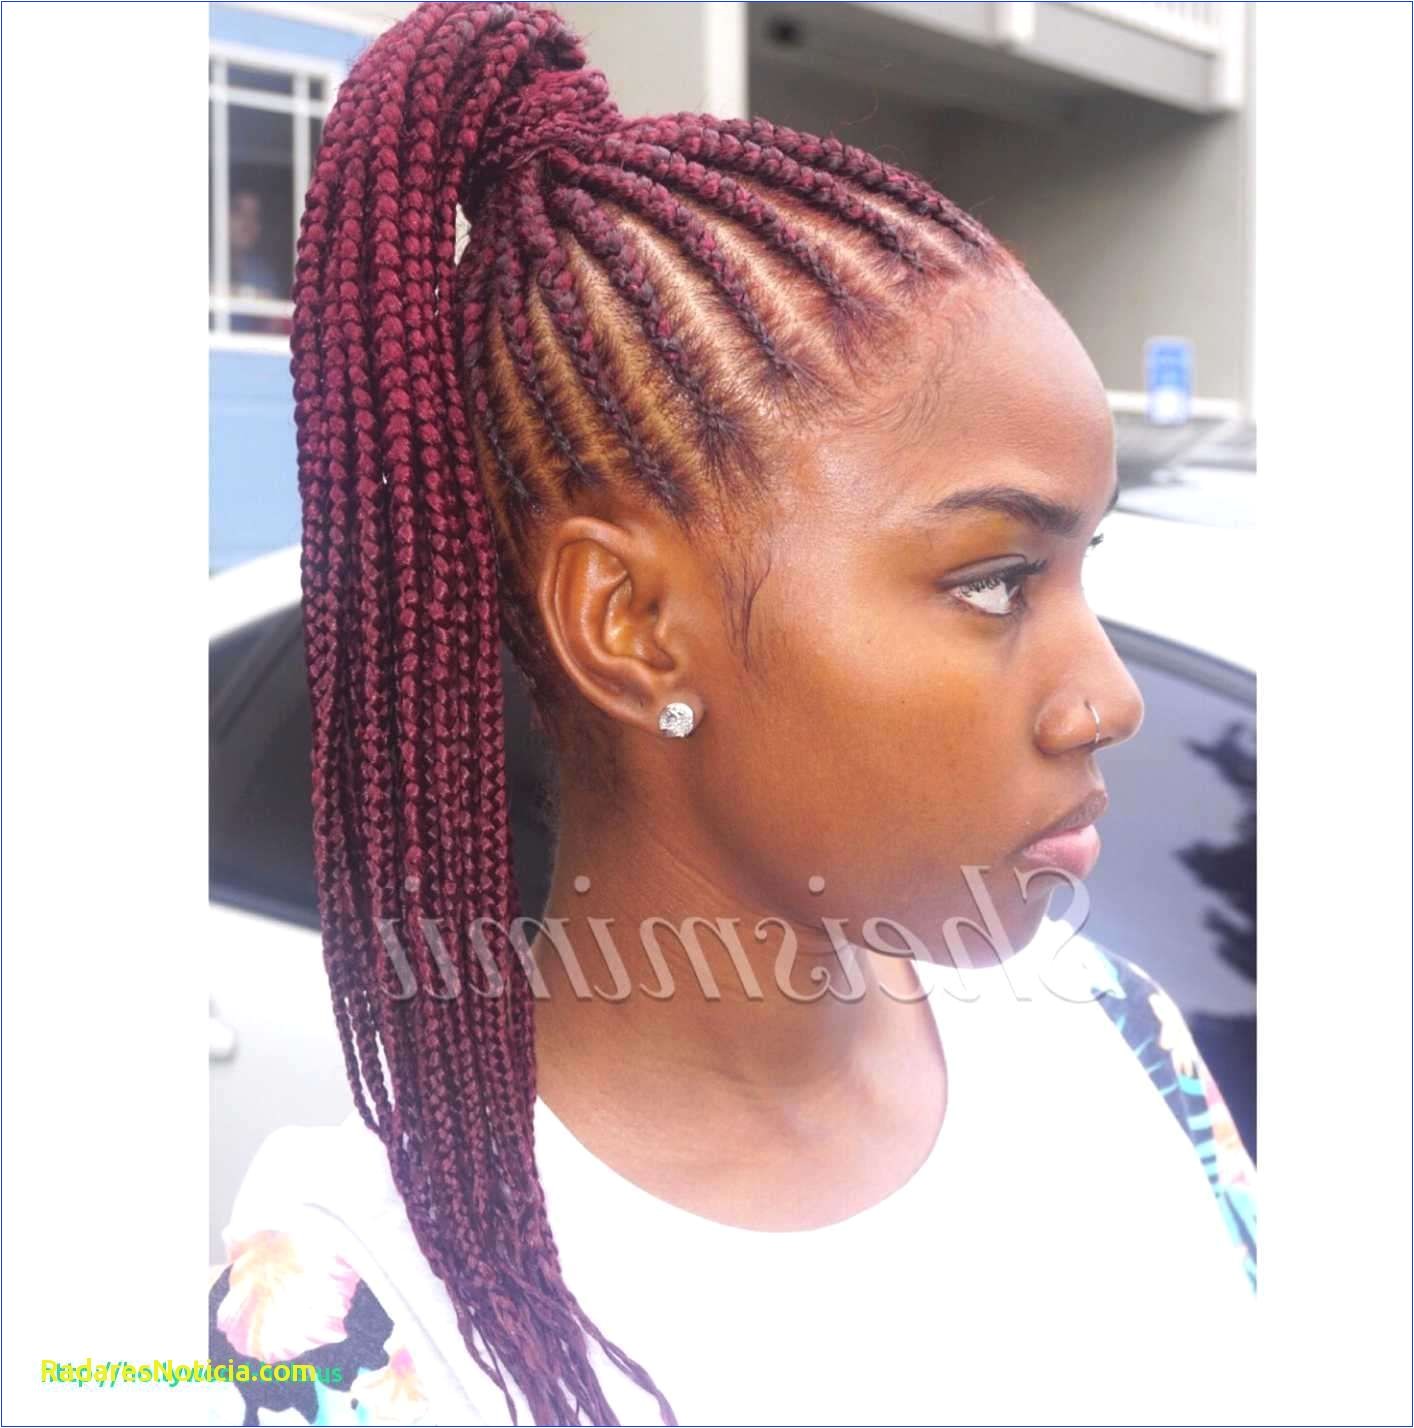 Hairstyles with Braids Best Big Braids Hairstyles Fresh Micro Hairstyles 0d Regrowhairproducts Black Hairstyles Braid Extensions from white girl